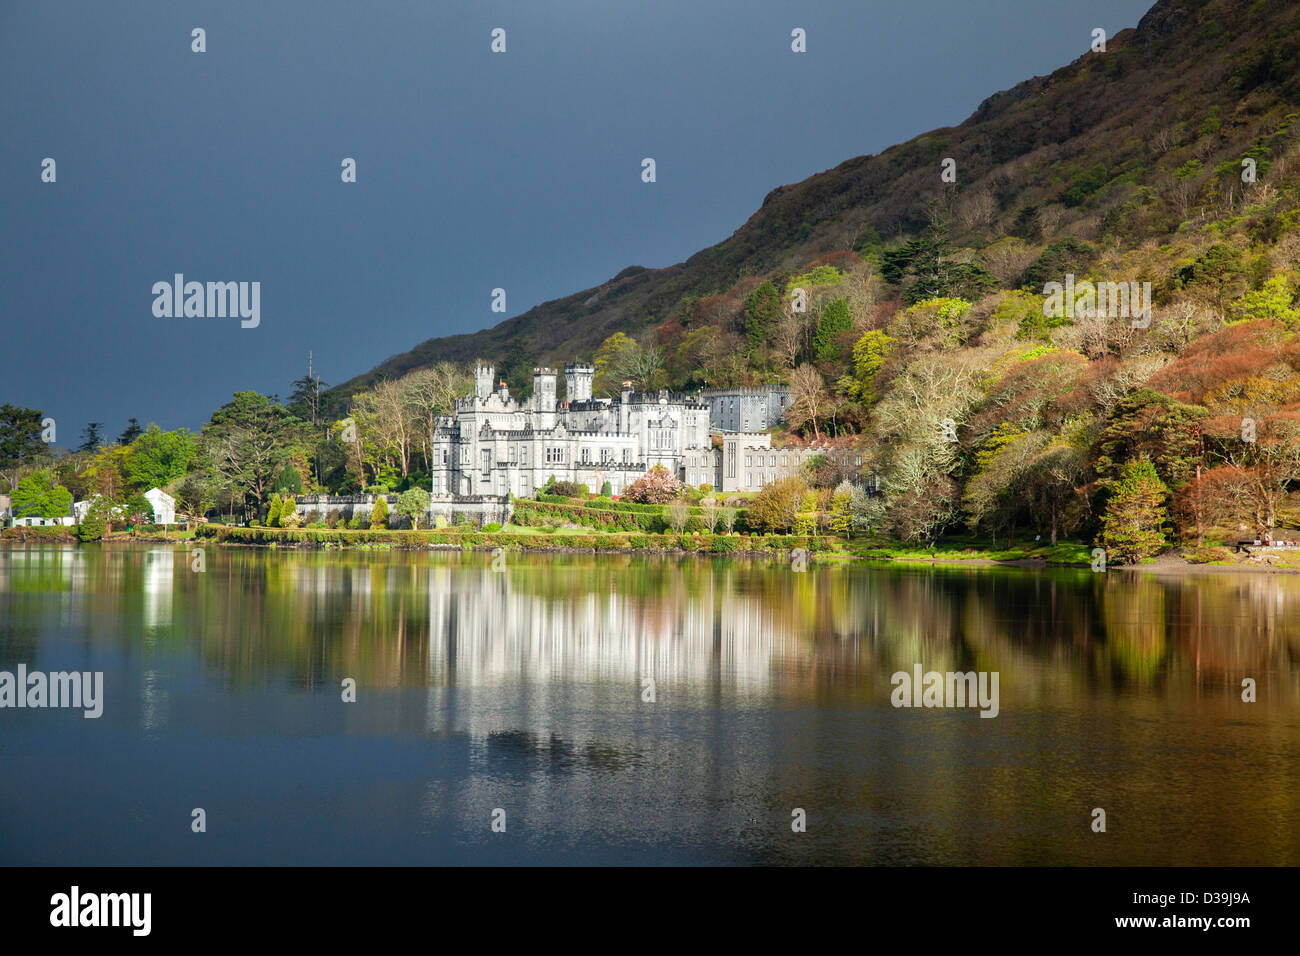 Autumn reflection of Kylemore Abbey in Kylemore Lough, Connemara, County Galway, Ireland. Stock Photo